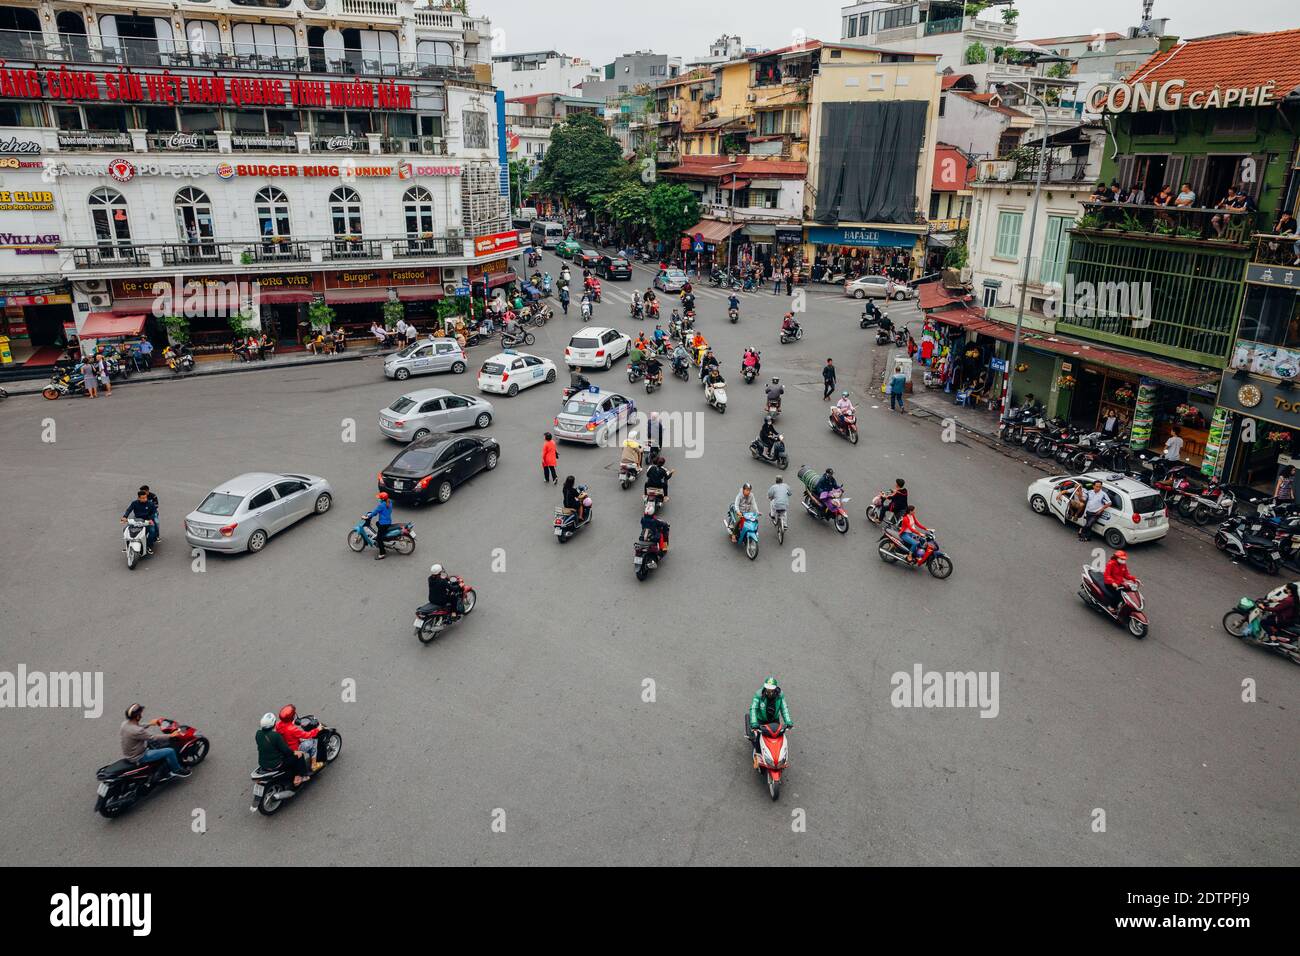 Hanoi, Vietnam - October 16, 2018: View of a famous chaotic traffic at the Dong Kinh Nghia Thuc Square in the Old Quarter of Hanoi. Stock Photo